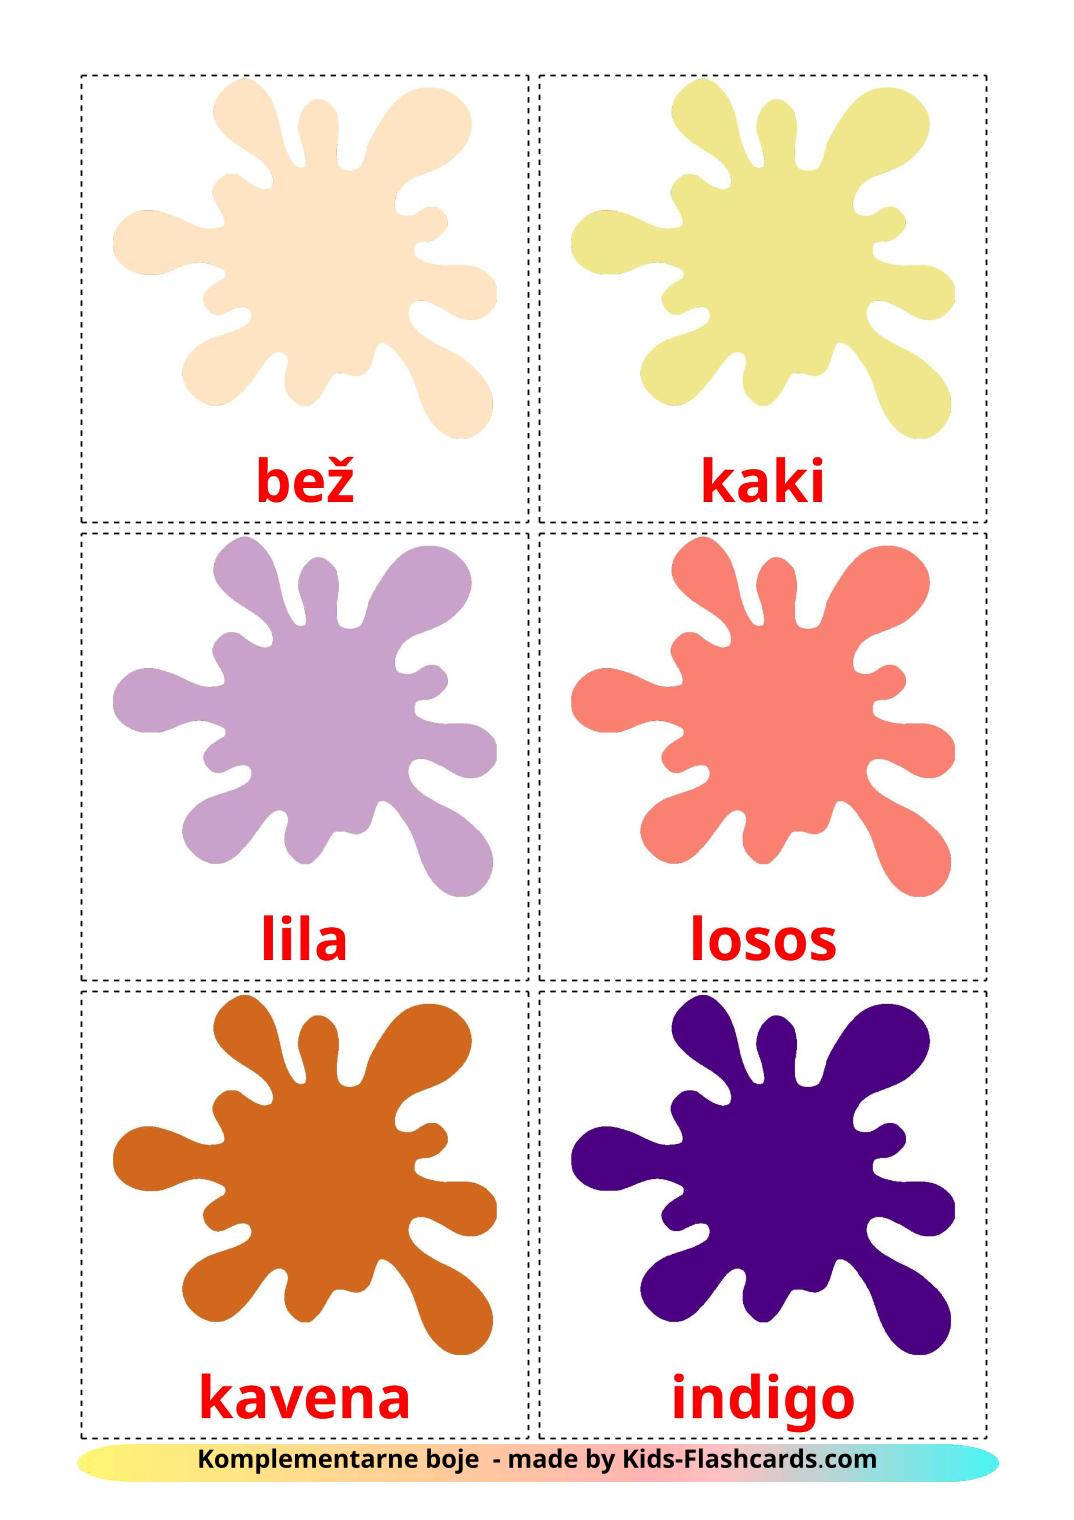 Secondary colors - 20 Free Printable croatian Flashcards 